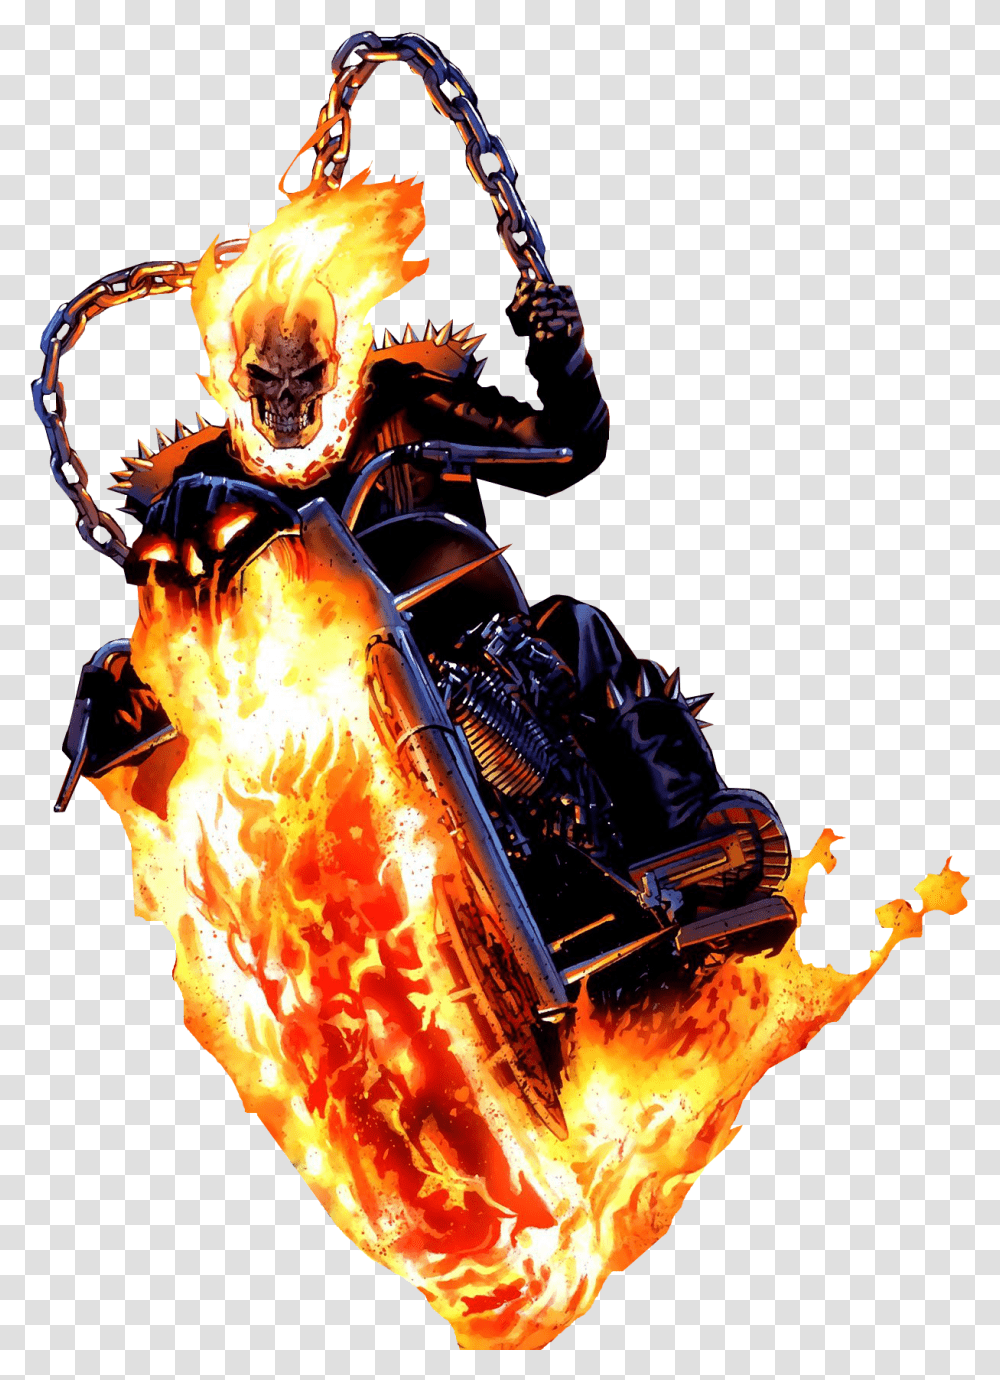 All Worlds Alliance Wiki Marvel Johnny Blaze Ghost Rider, Bonfire, Flame, Dragon, Knight Transparent Png